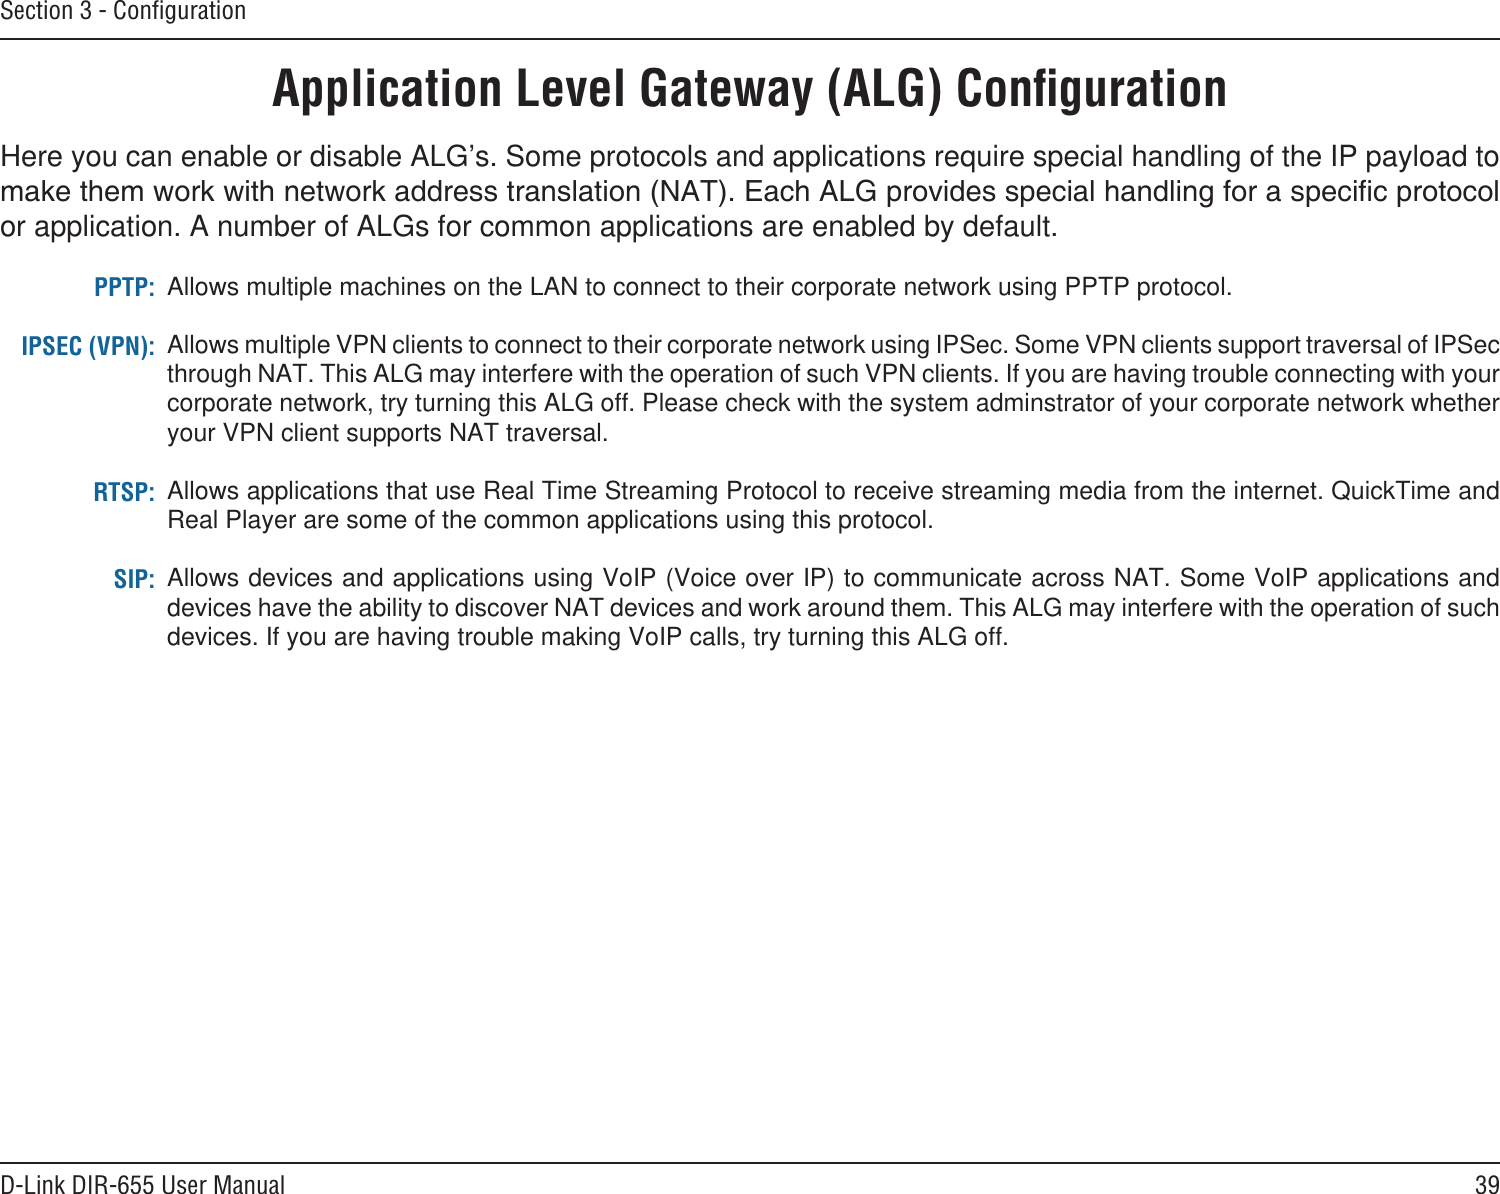 39D-Link DIR-655 User ManualSection 3 - ConﬁgurationApplication Level Gateway (ALG) ConﬁgurationHere you can enable or disable ALG’s. Some protocols and applications require special handling of the IP payload to or application. A number of ALGs for common applications are enabled by default.Allows multiple machines on the LAN to connect to their corporate network using PPTP protocol. Allows multiple VPN clients to connect to their corporate network using IPSec. Some VPN clients support traversal of IPSec through NAT. This ALG may interfere with the operation of such VPN clients. If you are having trouble connecting with your corporate network, try turning this ALG off. Please check with the system adminstrator of your corporate network whether your VPN client supports NAT traversal.Allows applications that use Real Time Streaming Protocol to receive streaming media from the internet. QuickTime and Real Player are some of the common applications using this protocol. Allows devices and applications using VoIP (Voice over IP) to communicate across NAT. Some VoIP applications and devices have the ability to discover NAT devices and work around them. This ALG may interfere with the operation of such devices. If you are having trouble making VoIP calls, try turning this ALG off. PPTP:IPSEC (VPN):RTSP:SIP: